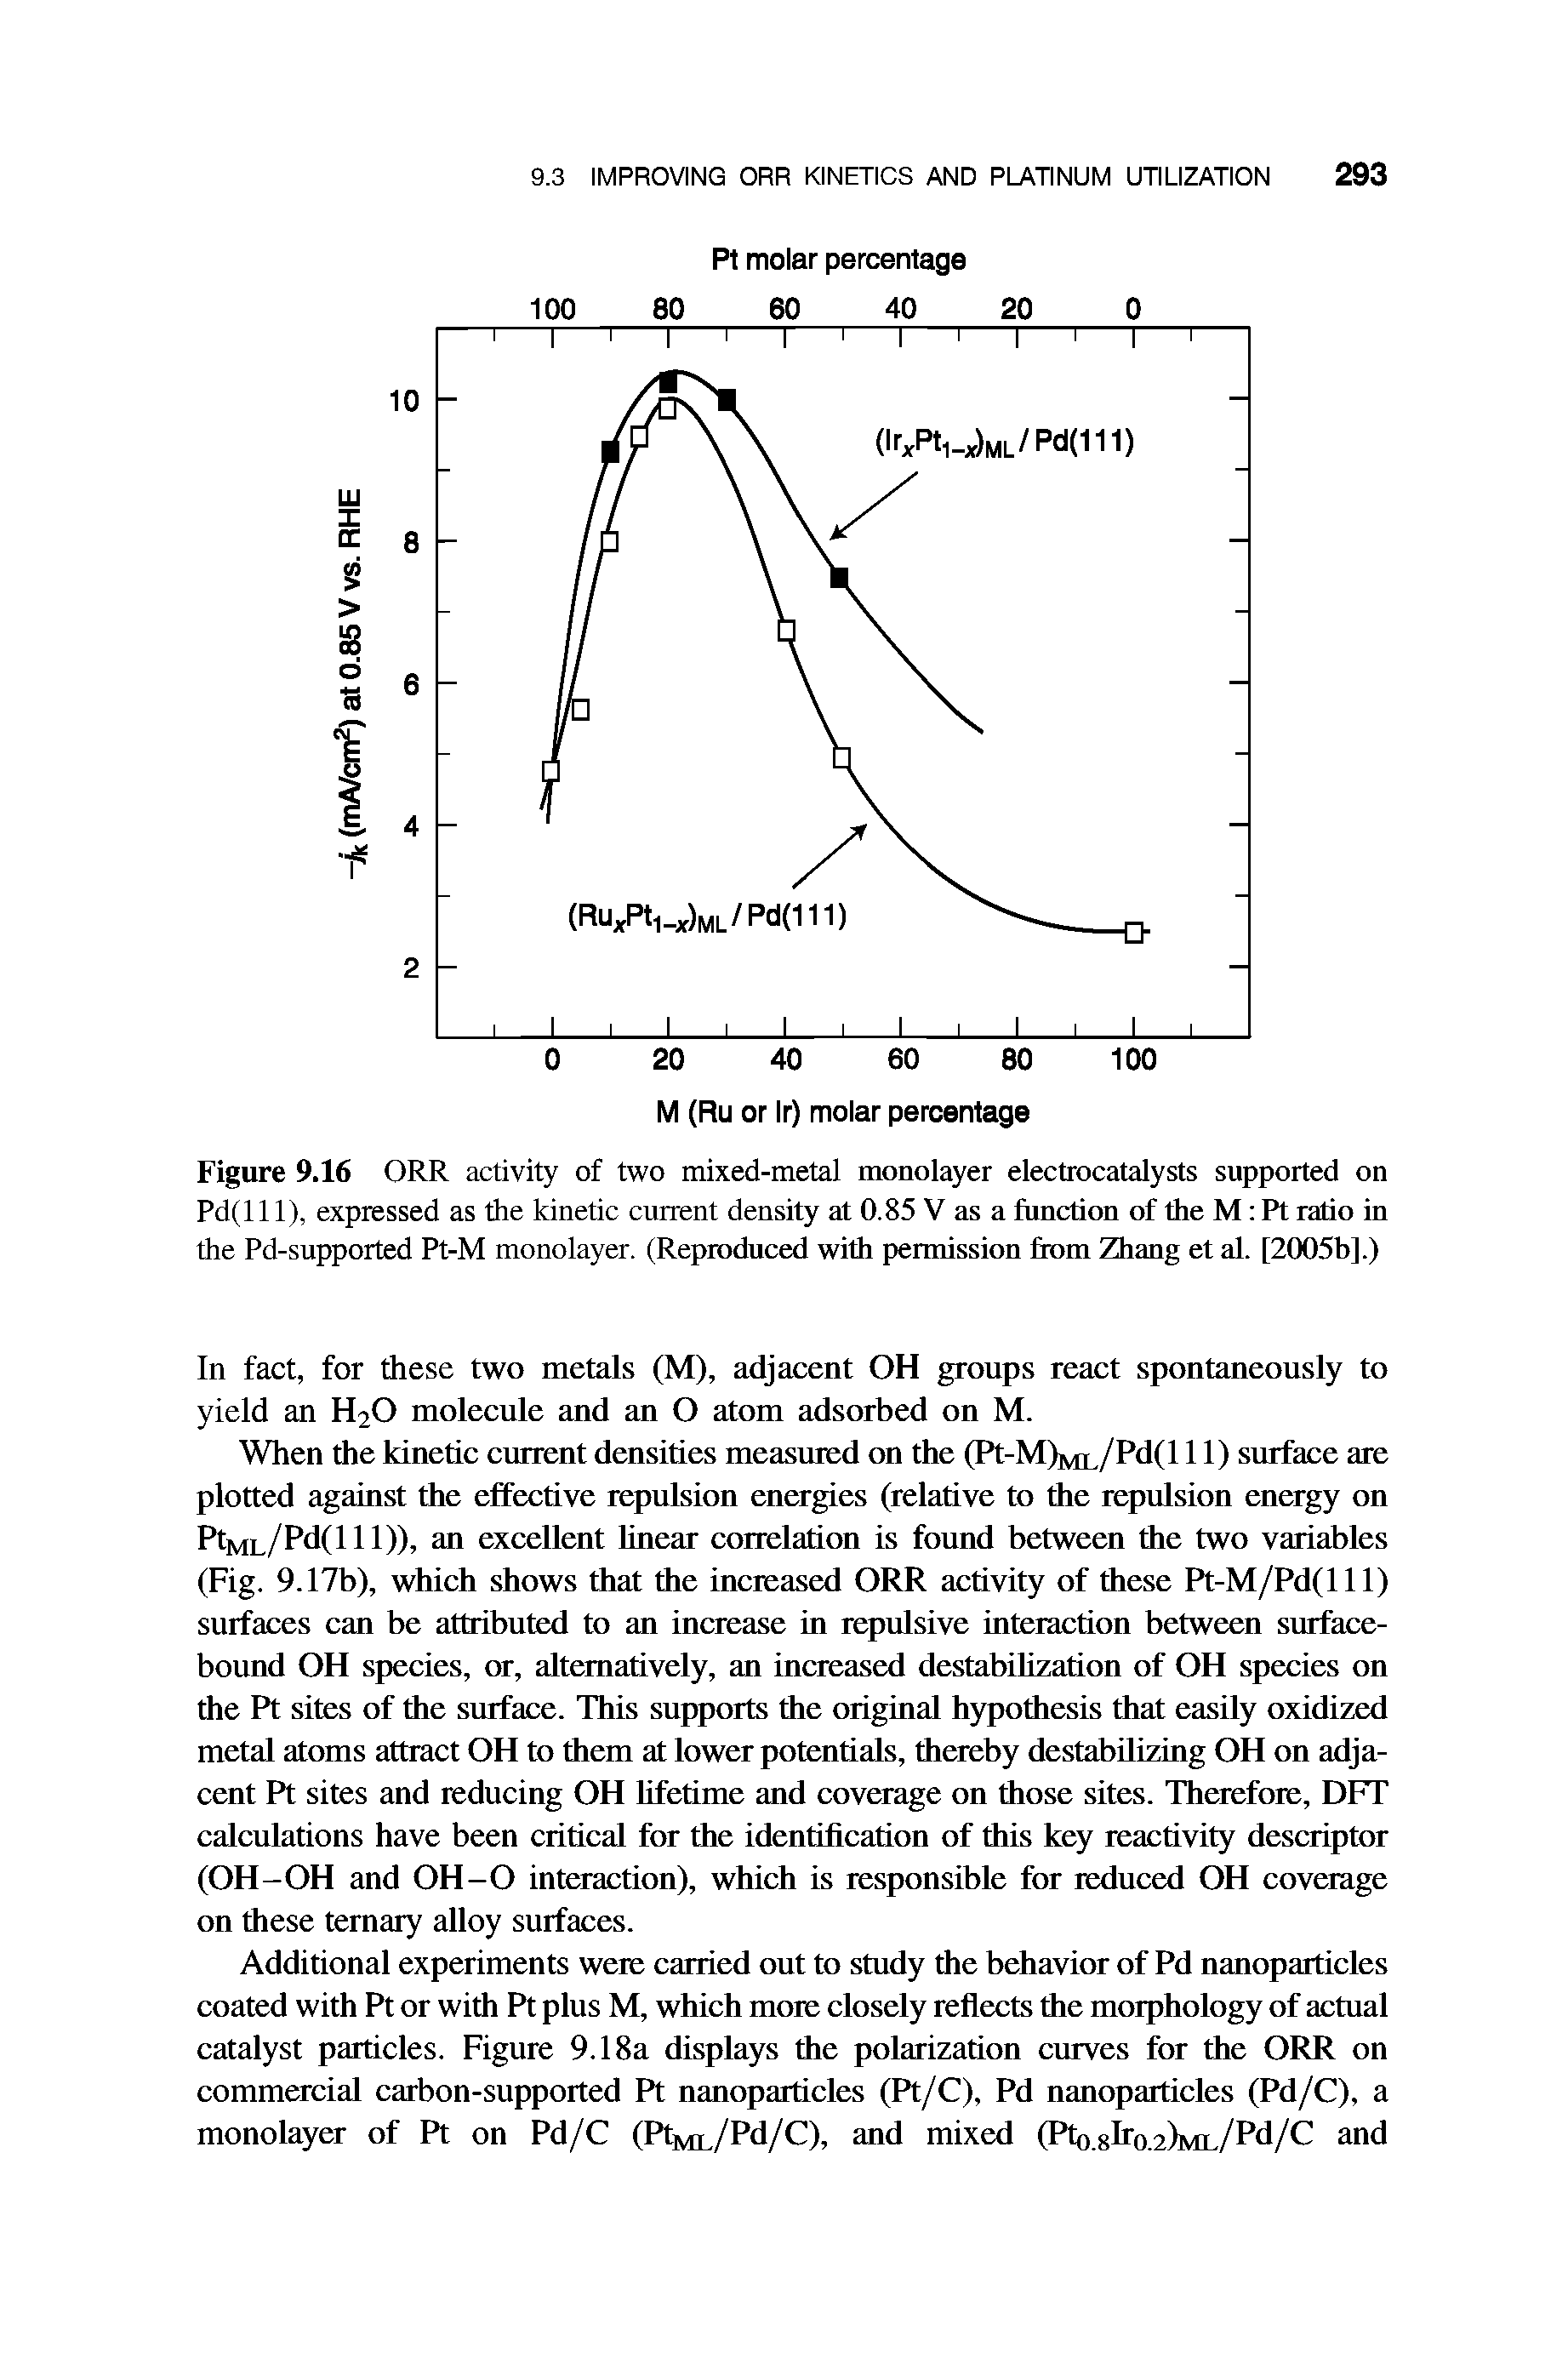 Figure 9.16 ORR activity of two mixed-metal monolayer electrocatalysts supported on Pd(l 11), expressed as the kinetic current density at 0.85 V as a function of the M Pt ratio in the Pd-supported Pt-M monolayer. (Reproduced with permission from Zhang et al. [2005b].)...